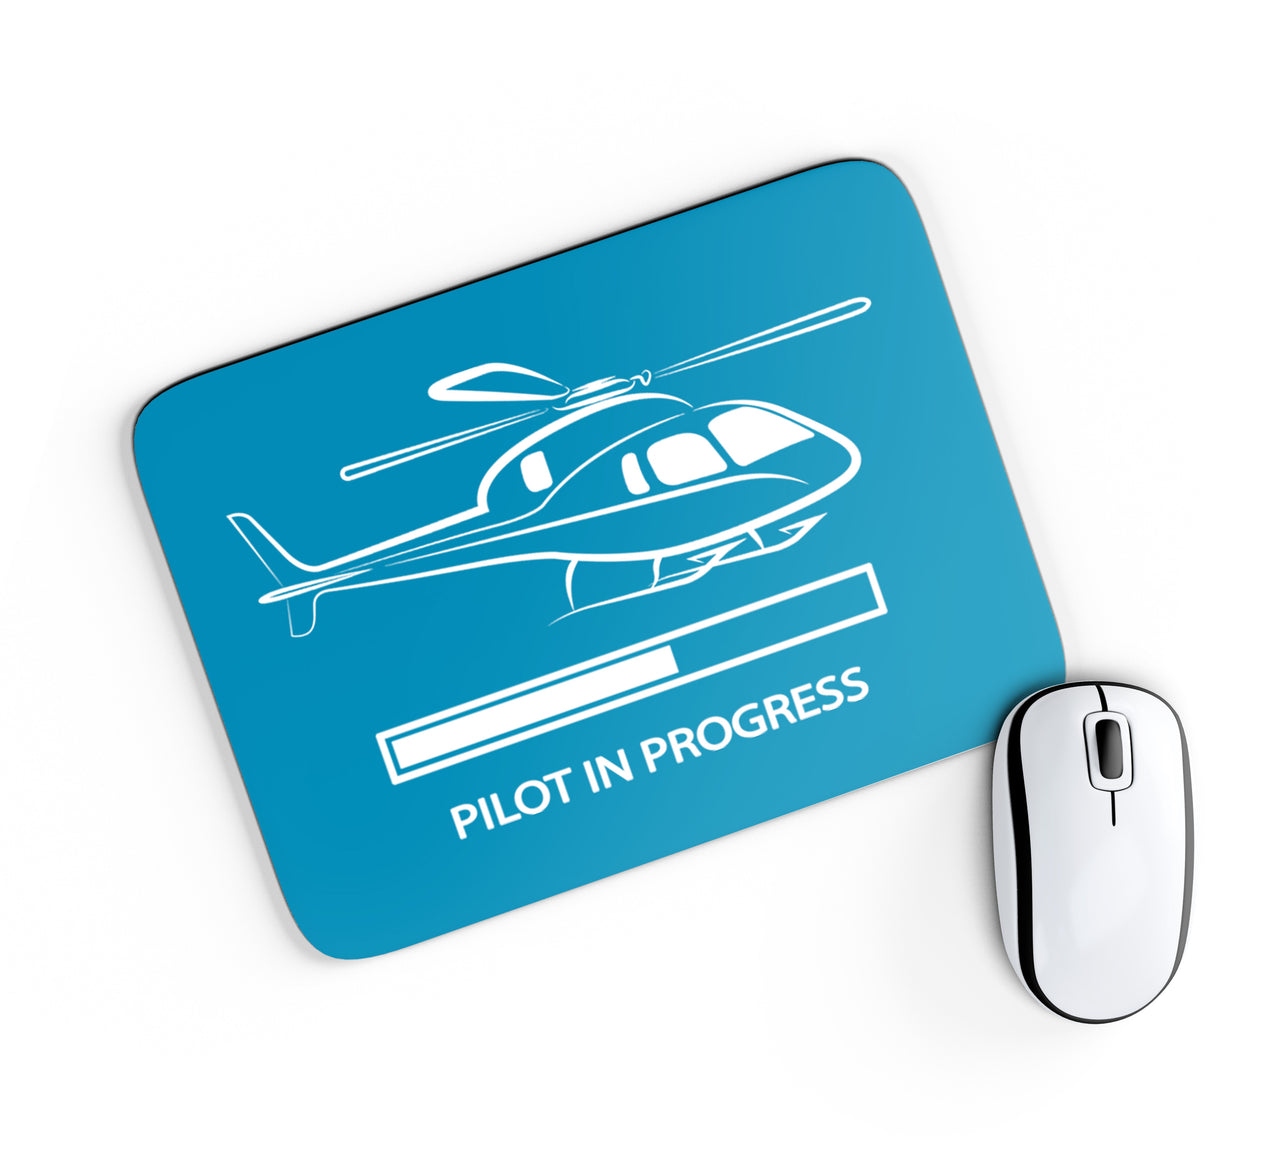 Pilot In Progress (Helicopter) Designed Mouse Pads